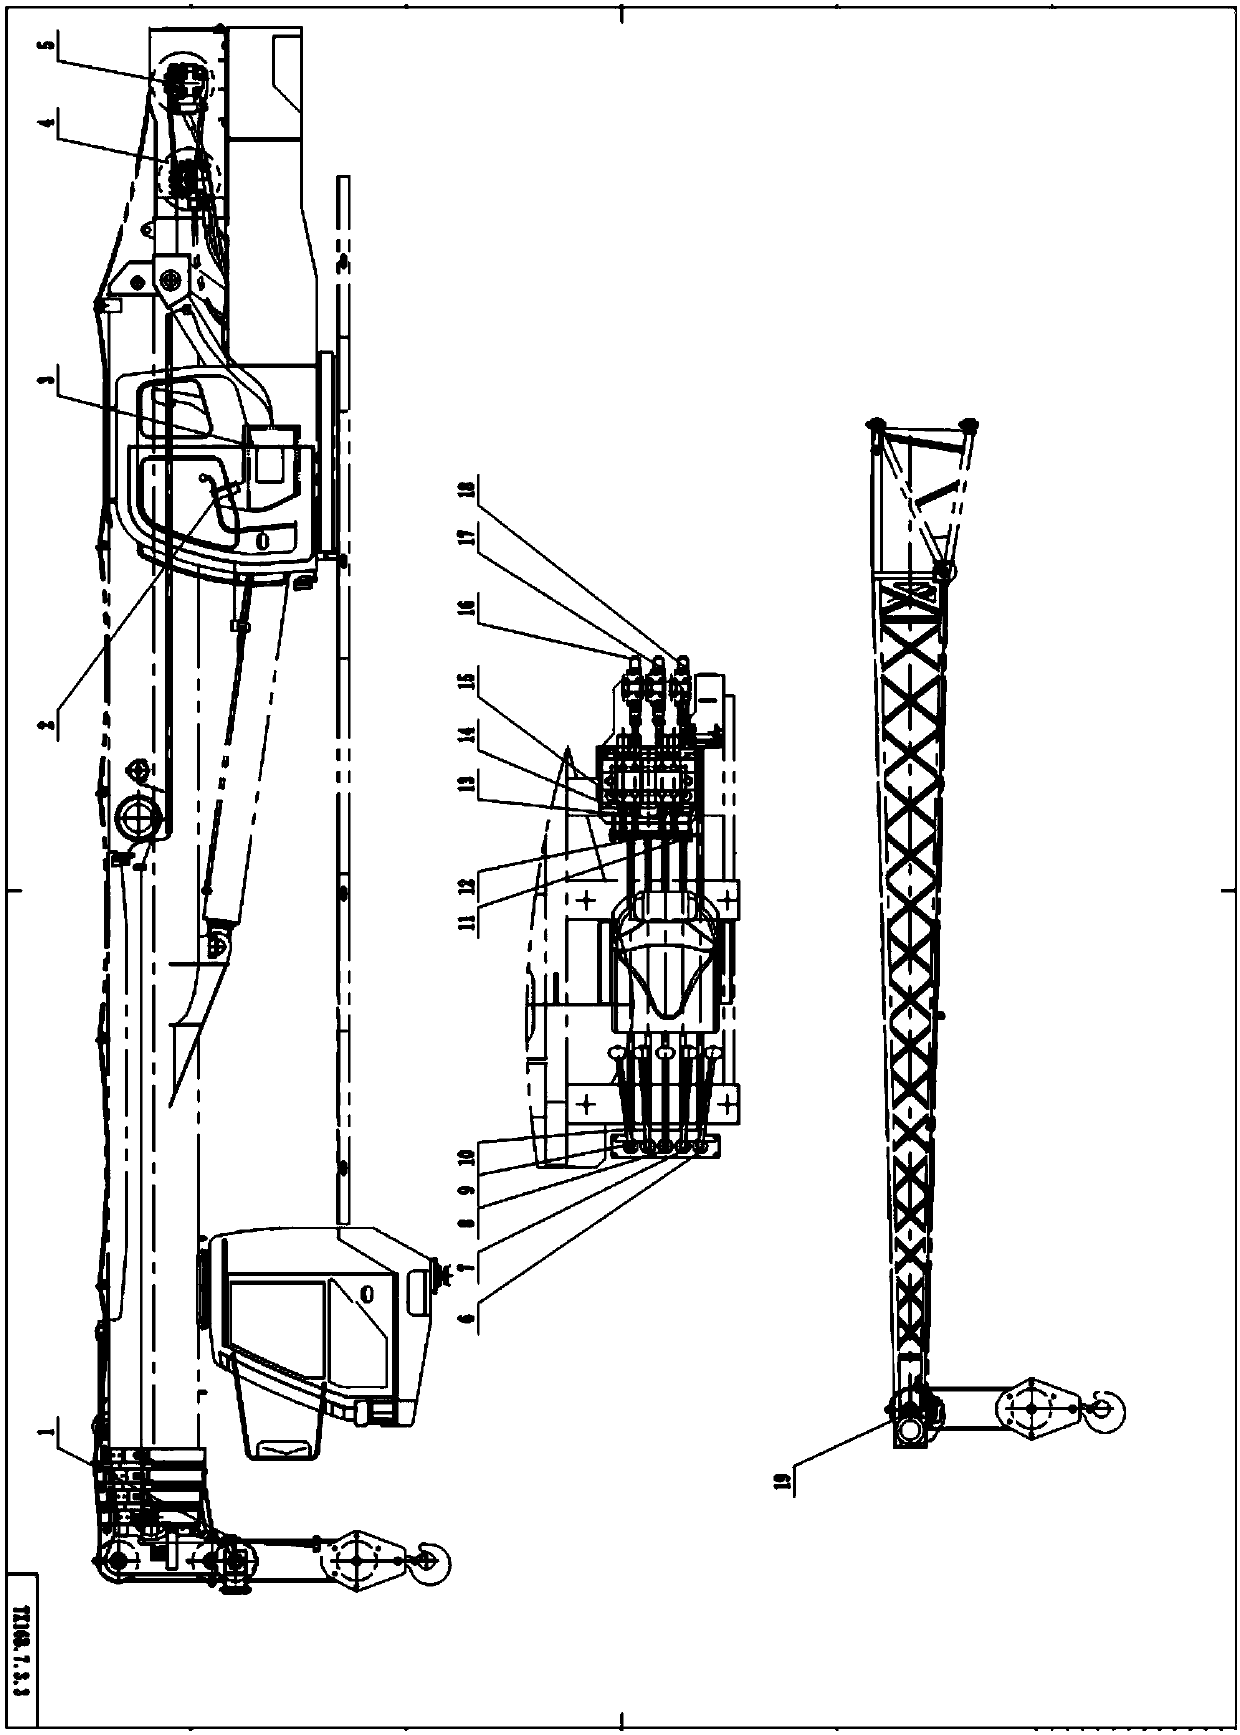 Vehicle-mounted crane limiting protection system and automobile crane